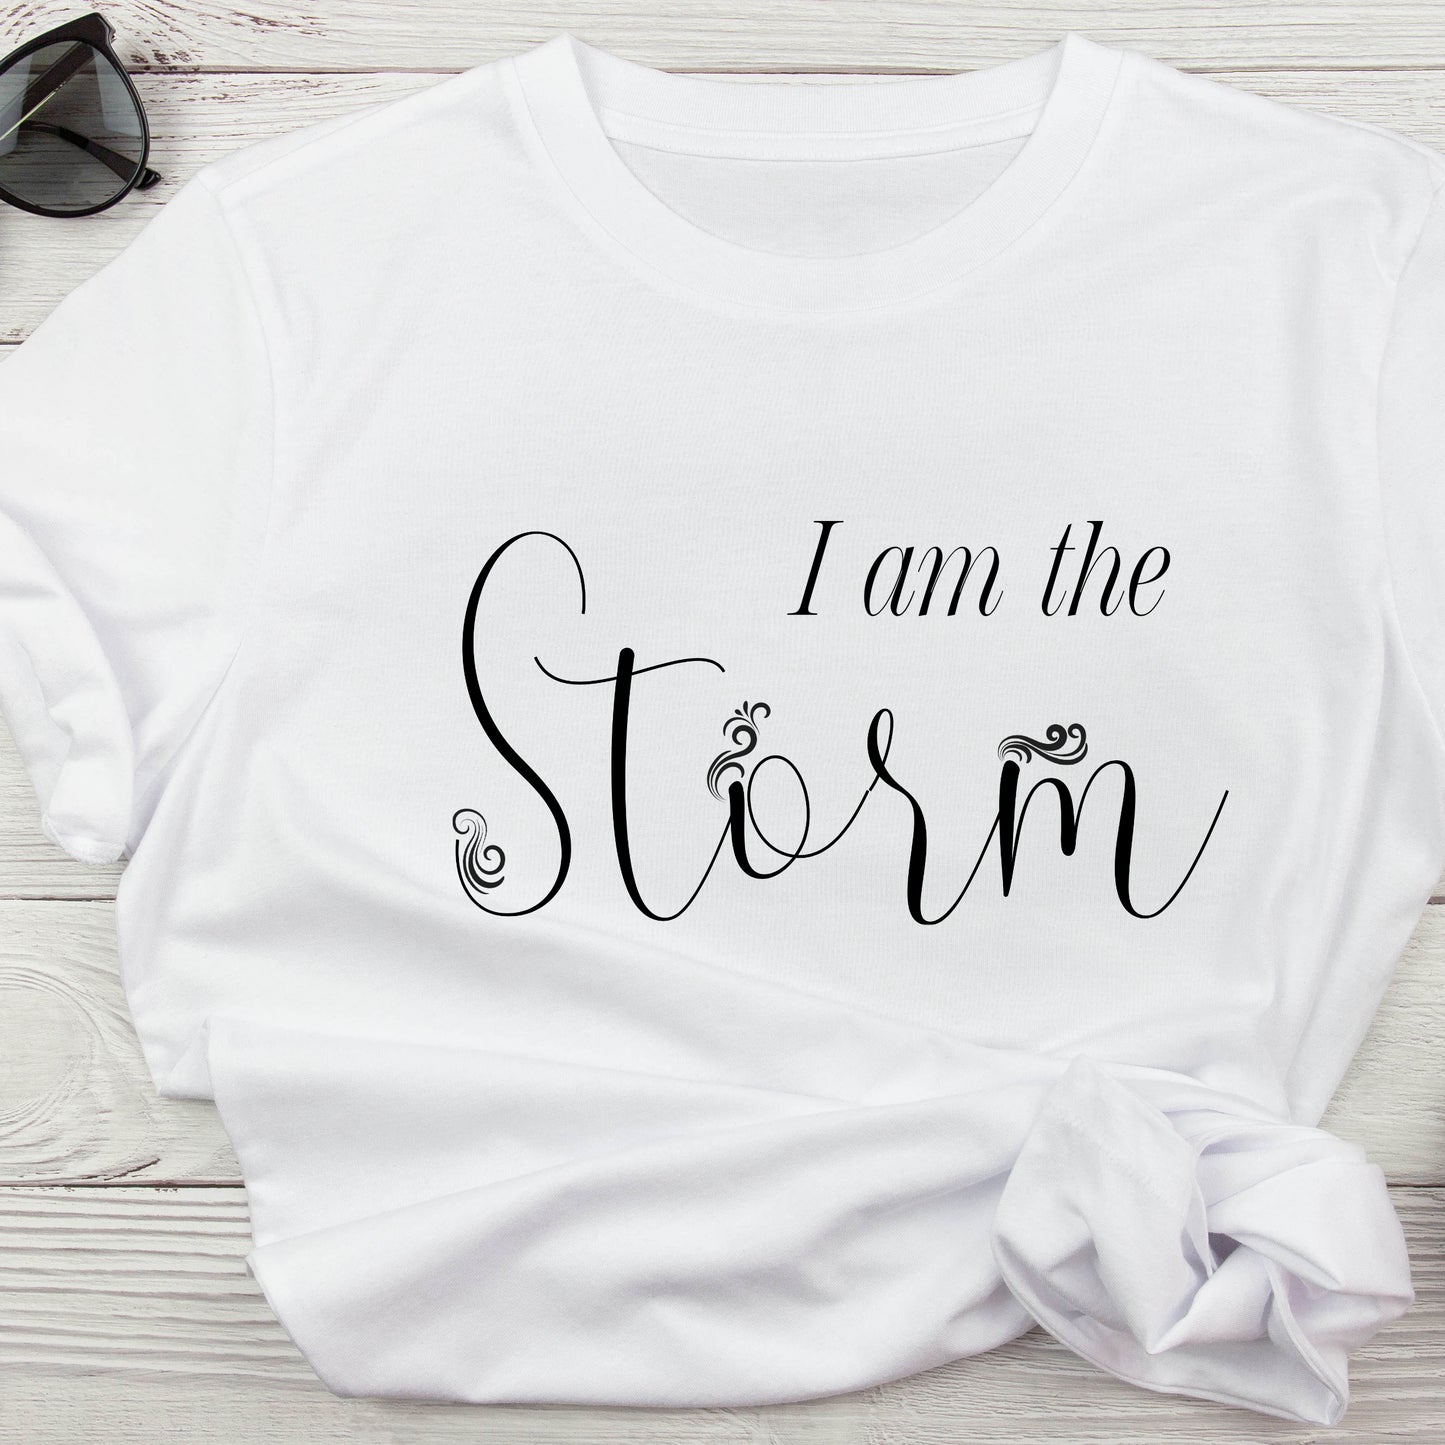 The Storm T-Shirt Inspirational Quote TShirt For Woman T Shirt Motivational Shirt For Woman Shirt Positive Message Tee